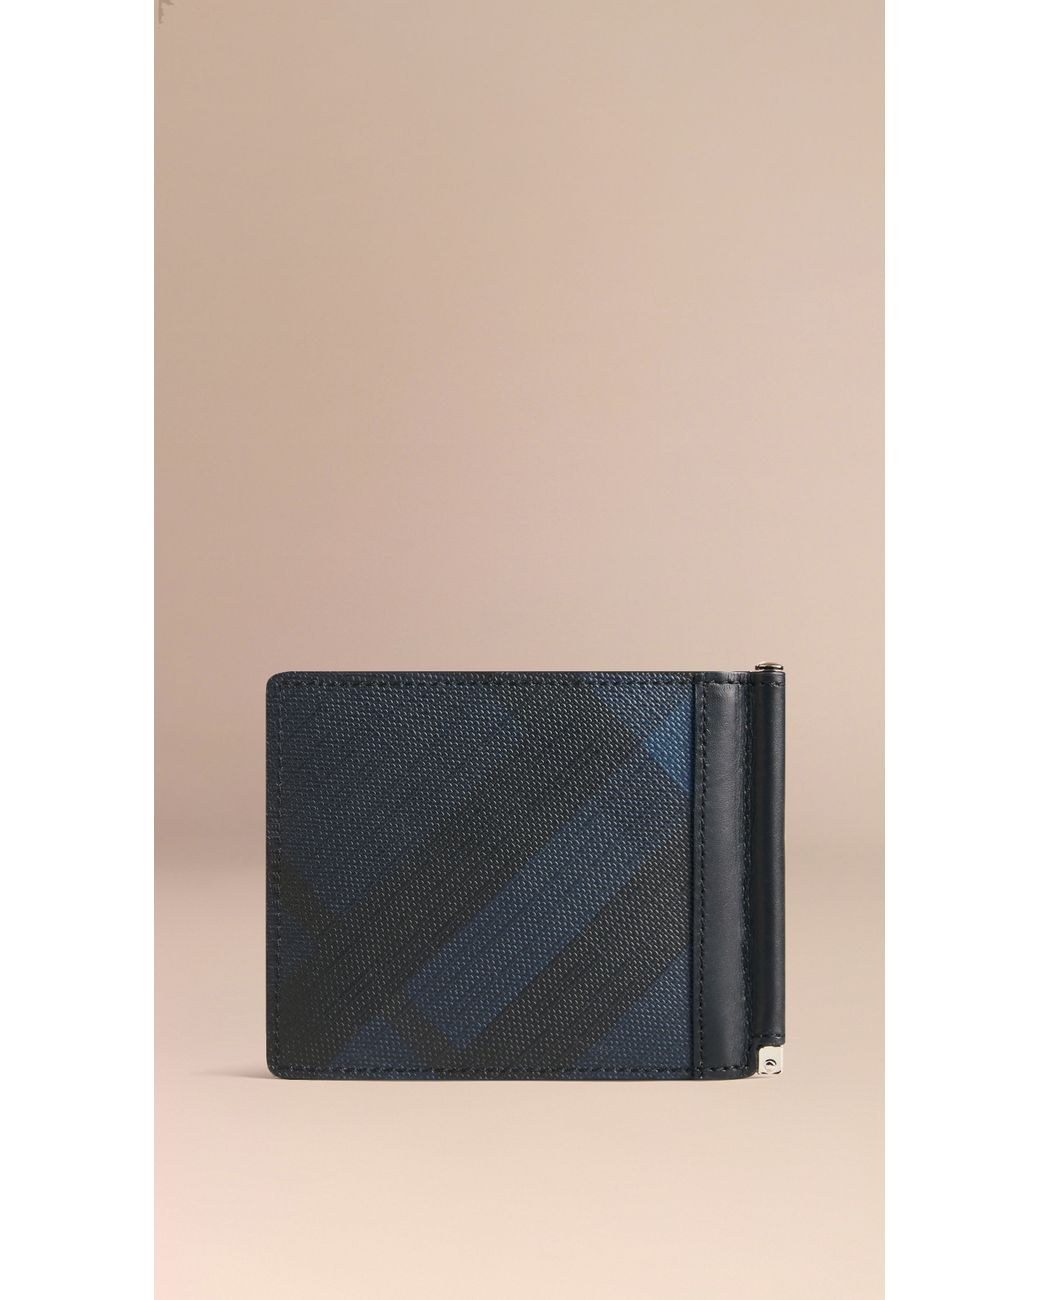 Burberry House Check Chase Deep Blue Grainy Leather Money Clip